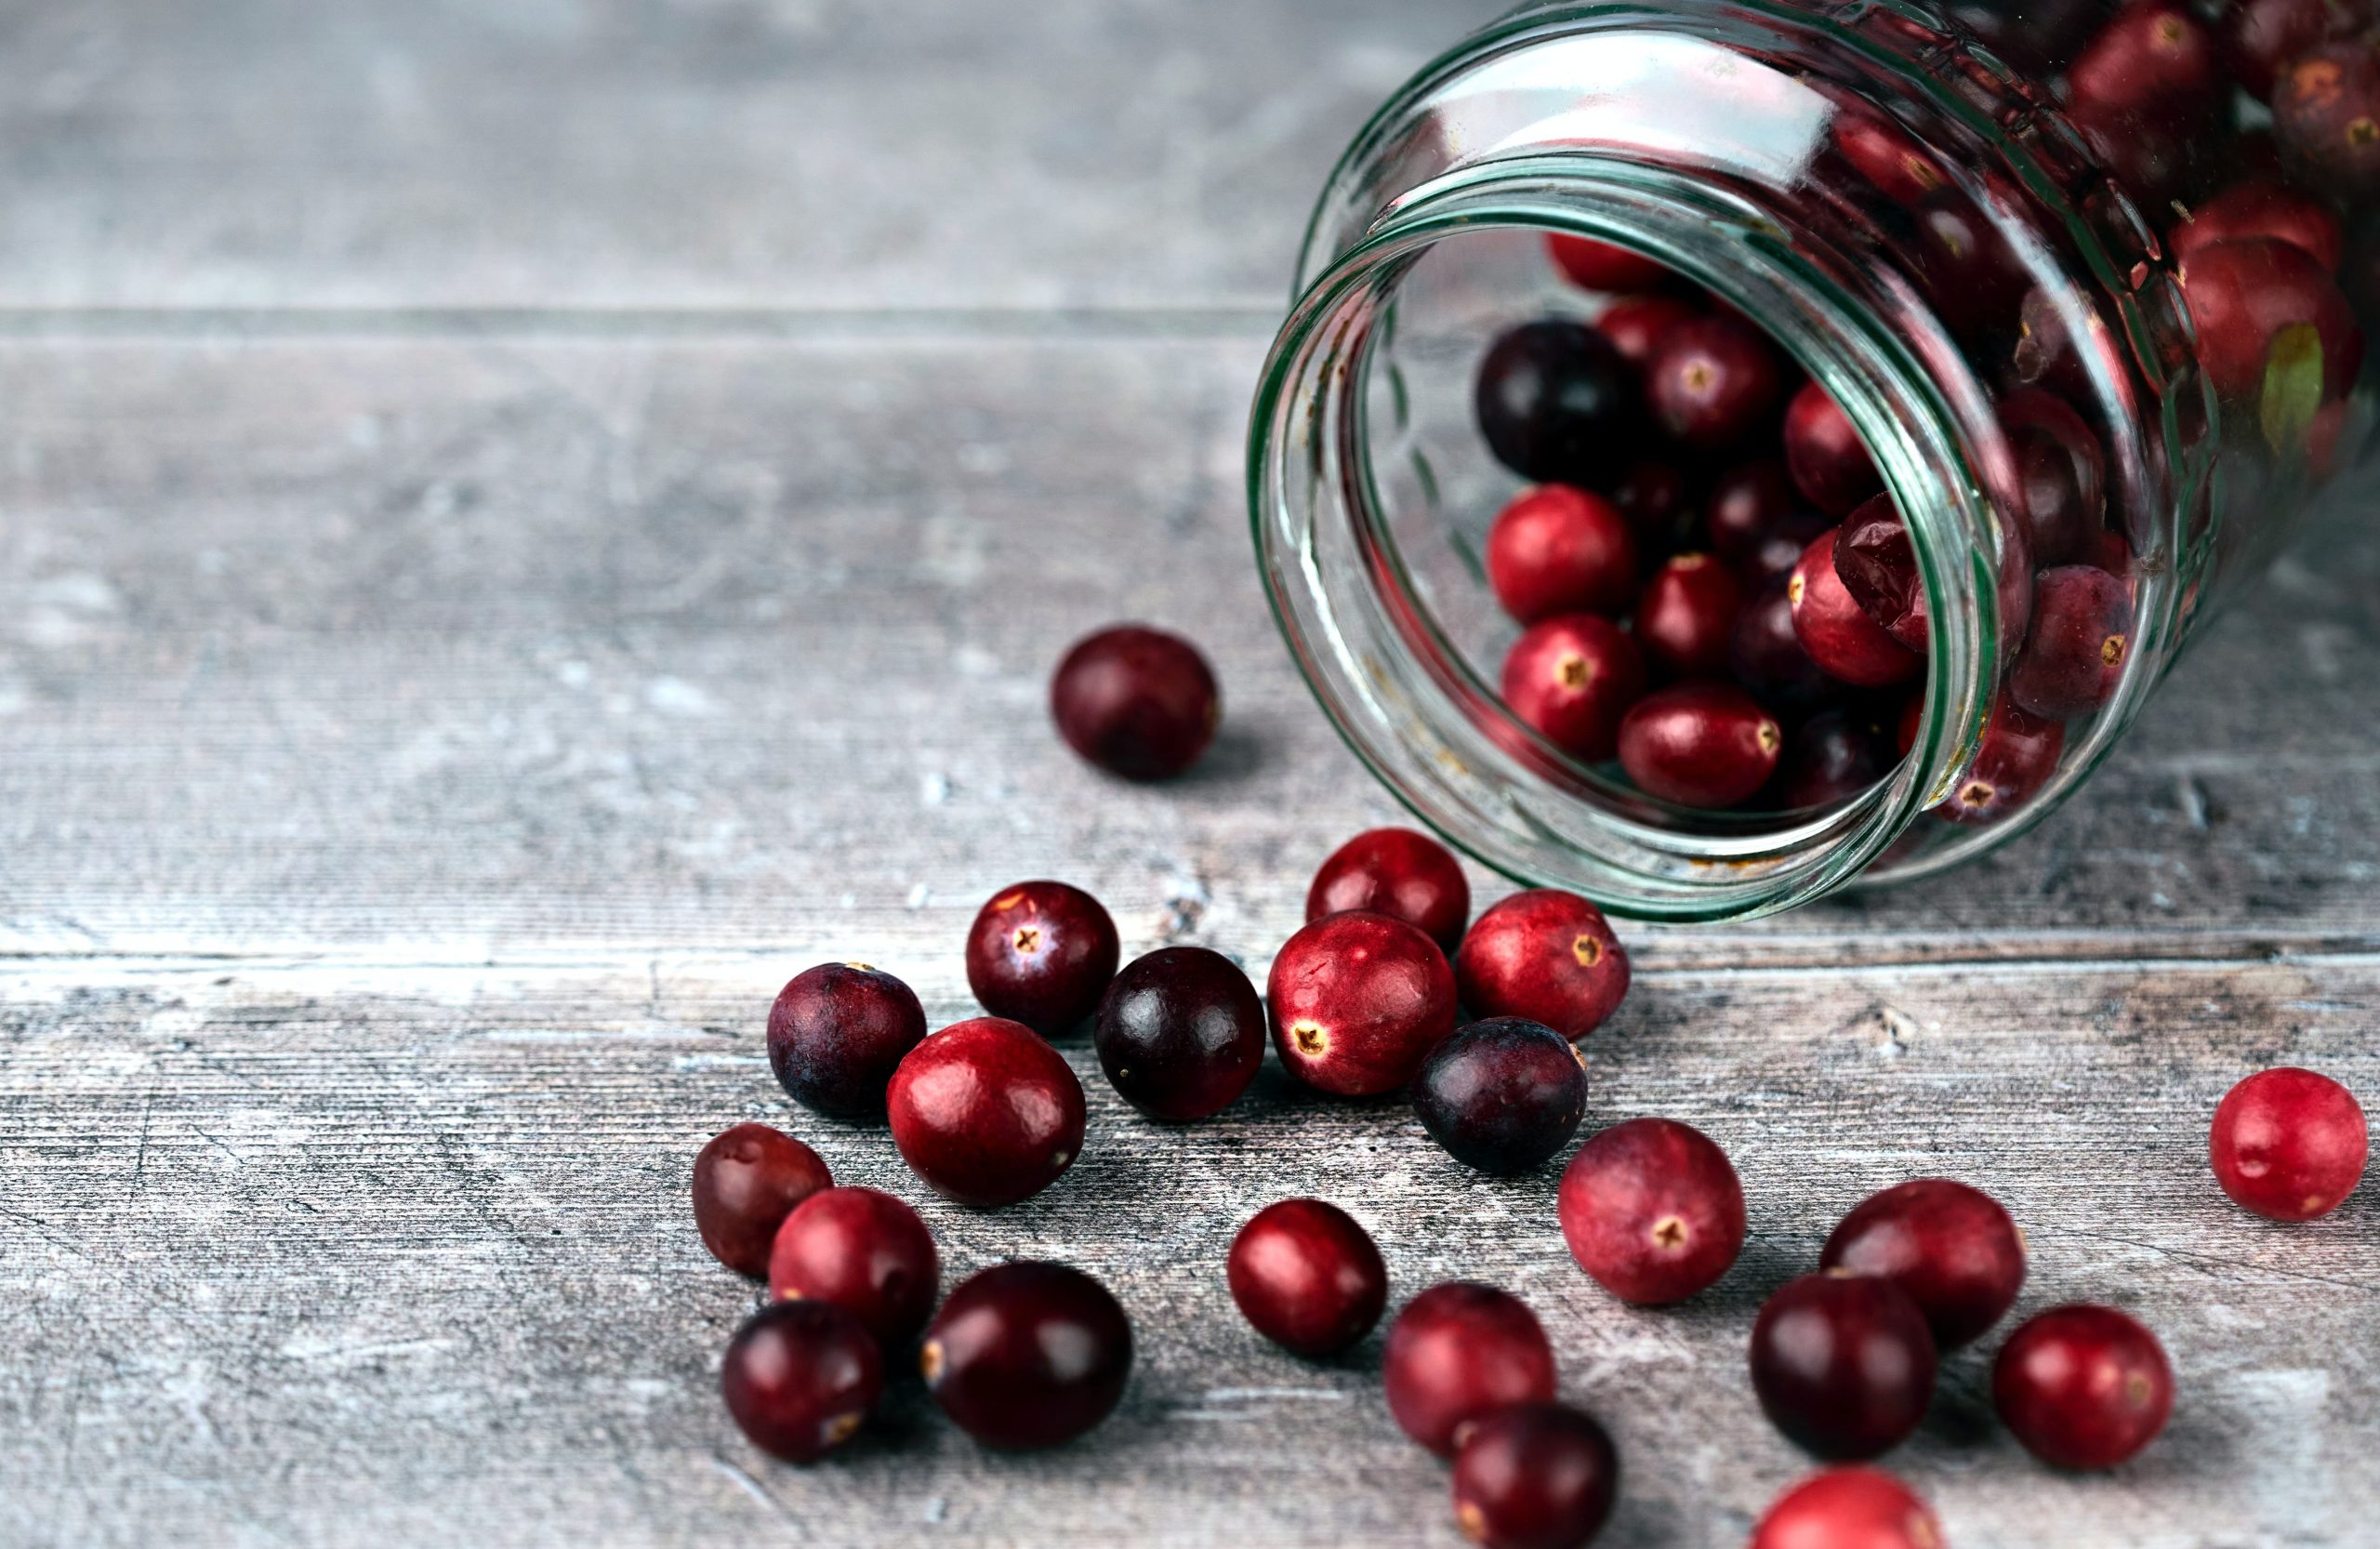 Cranberries may boost heart health two hours after consumption: Study